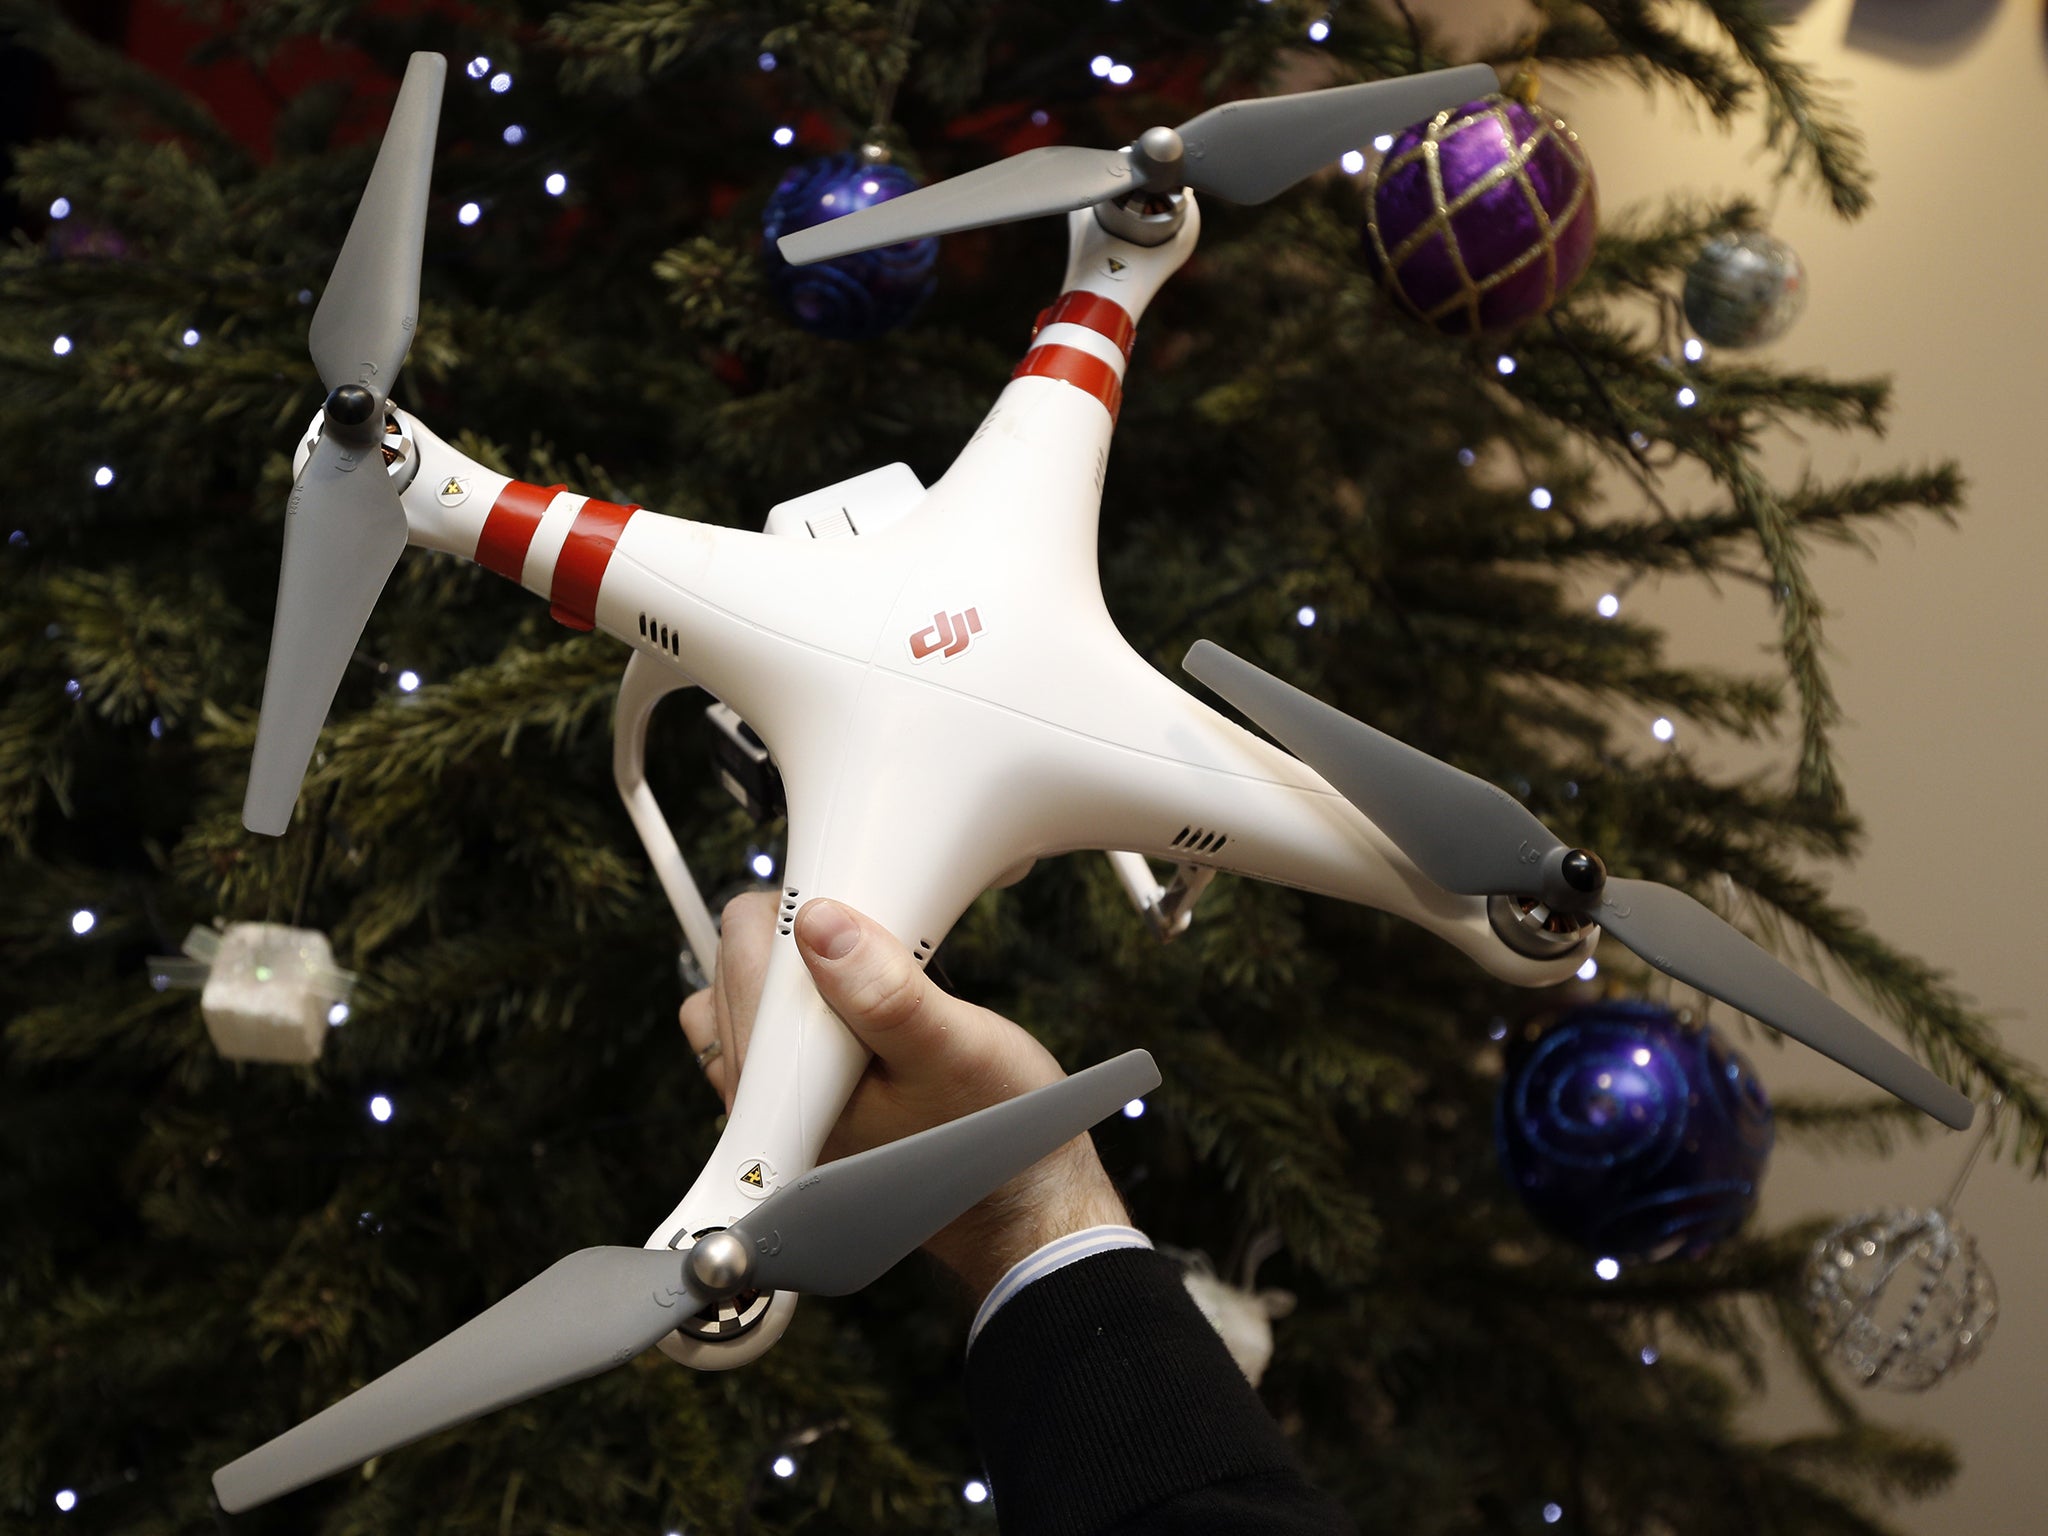 People could face prosecution for flying drones dangerously